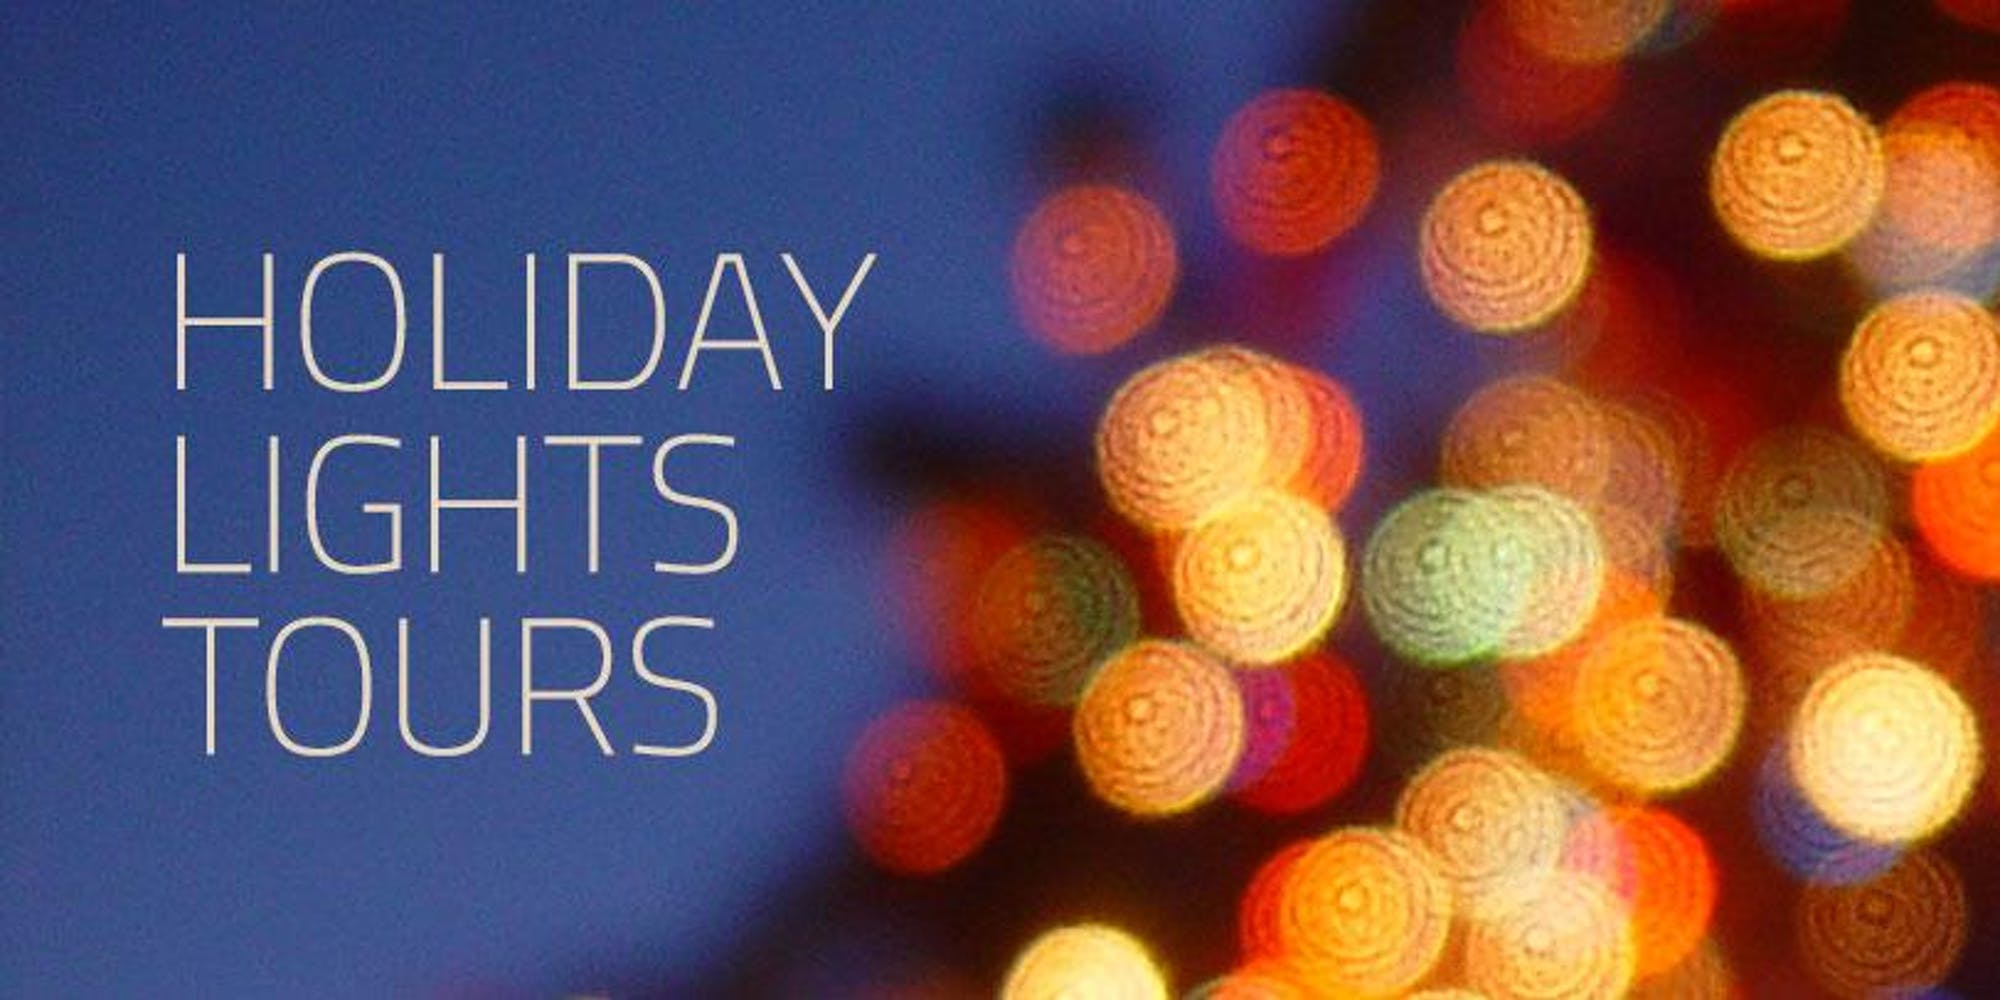 Holiday Lights Tours - MPCC WinterFest 2018